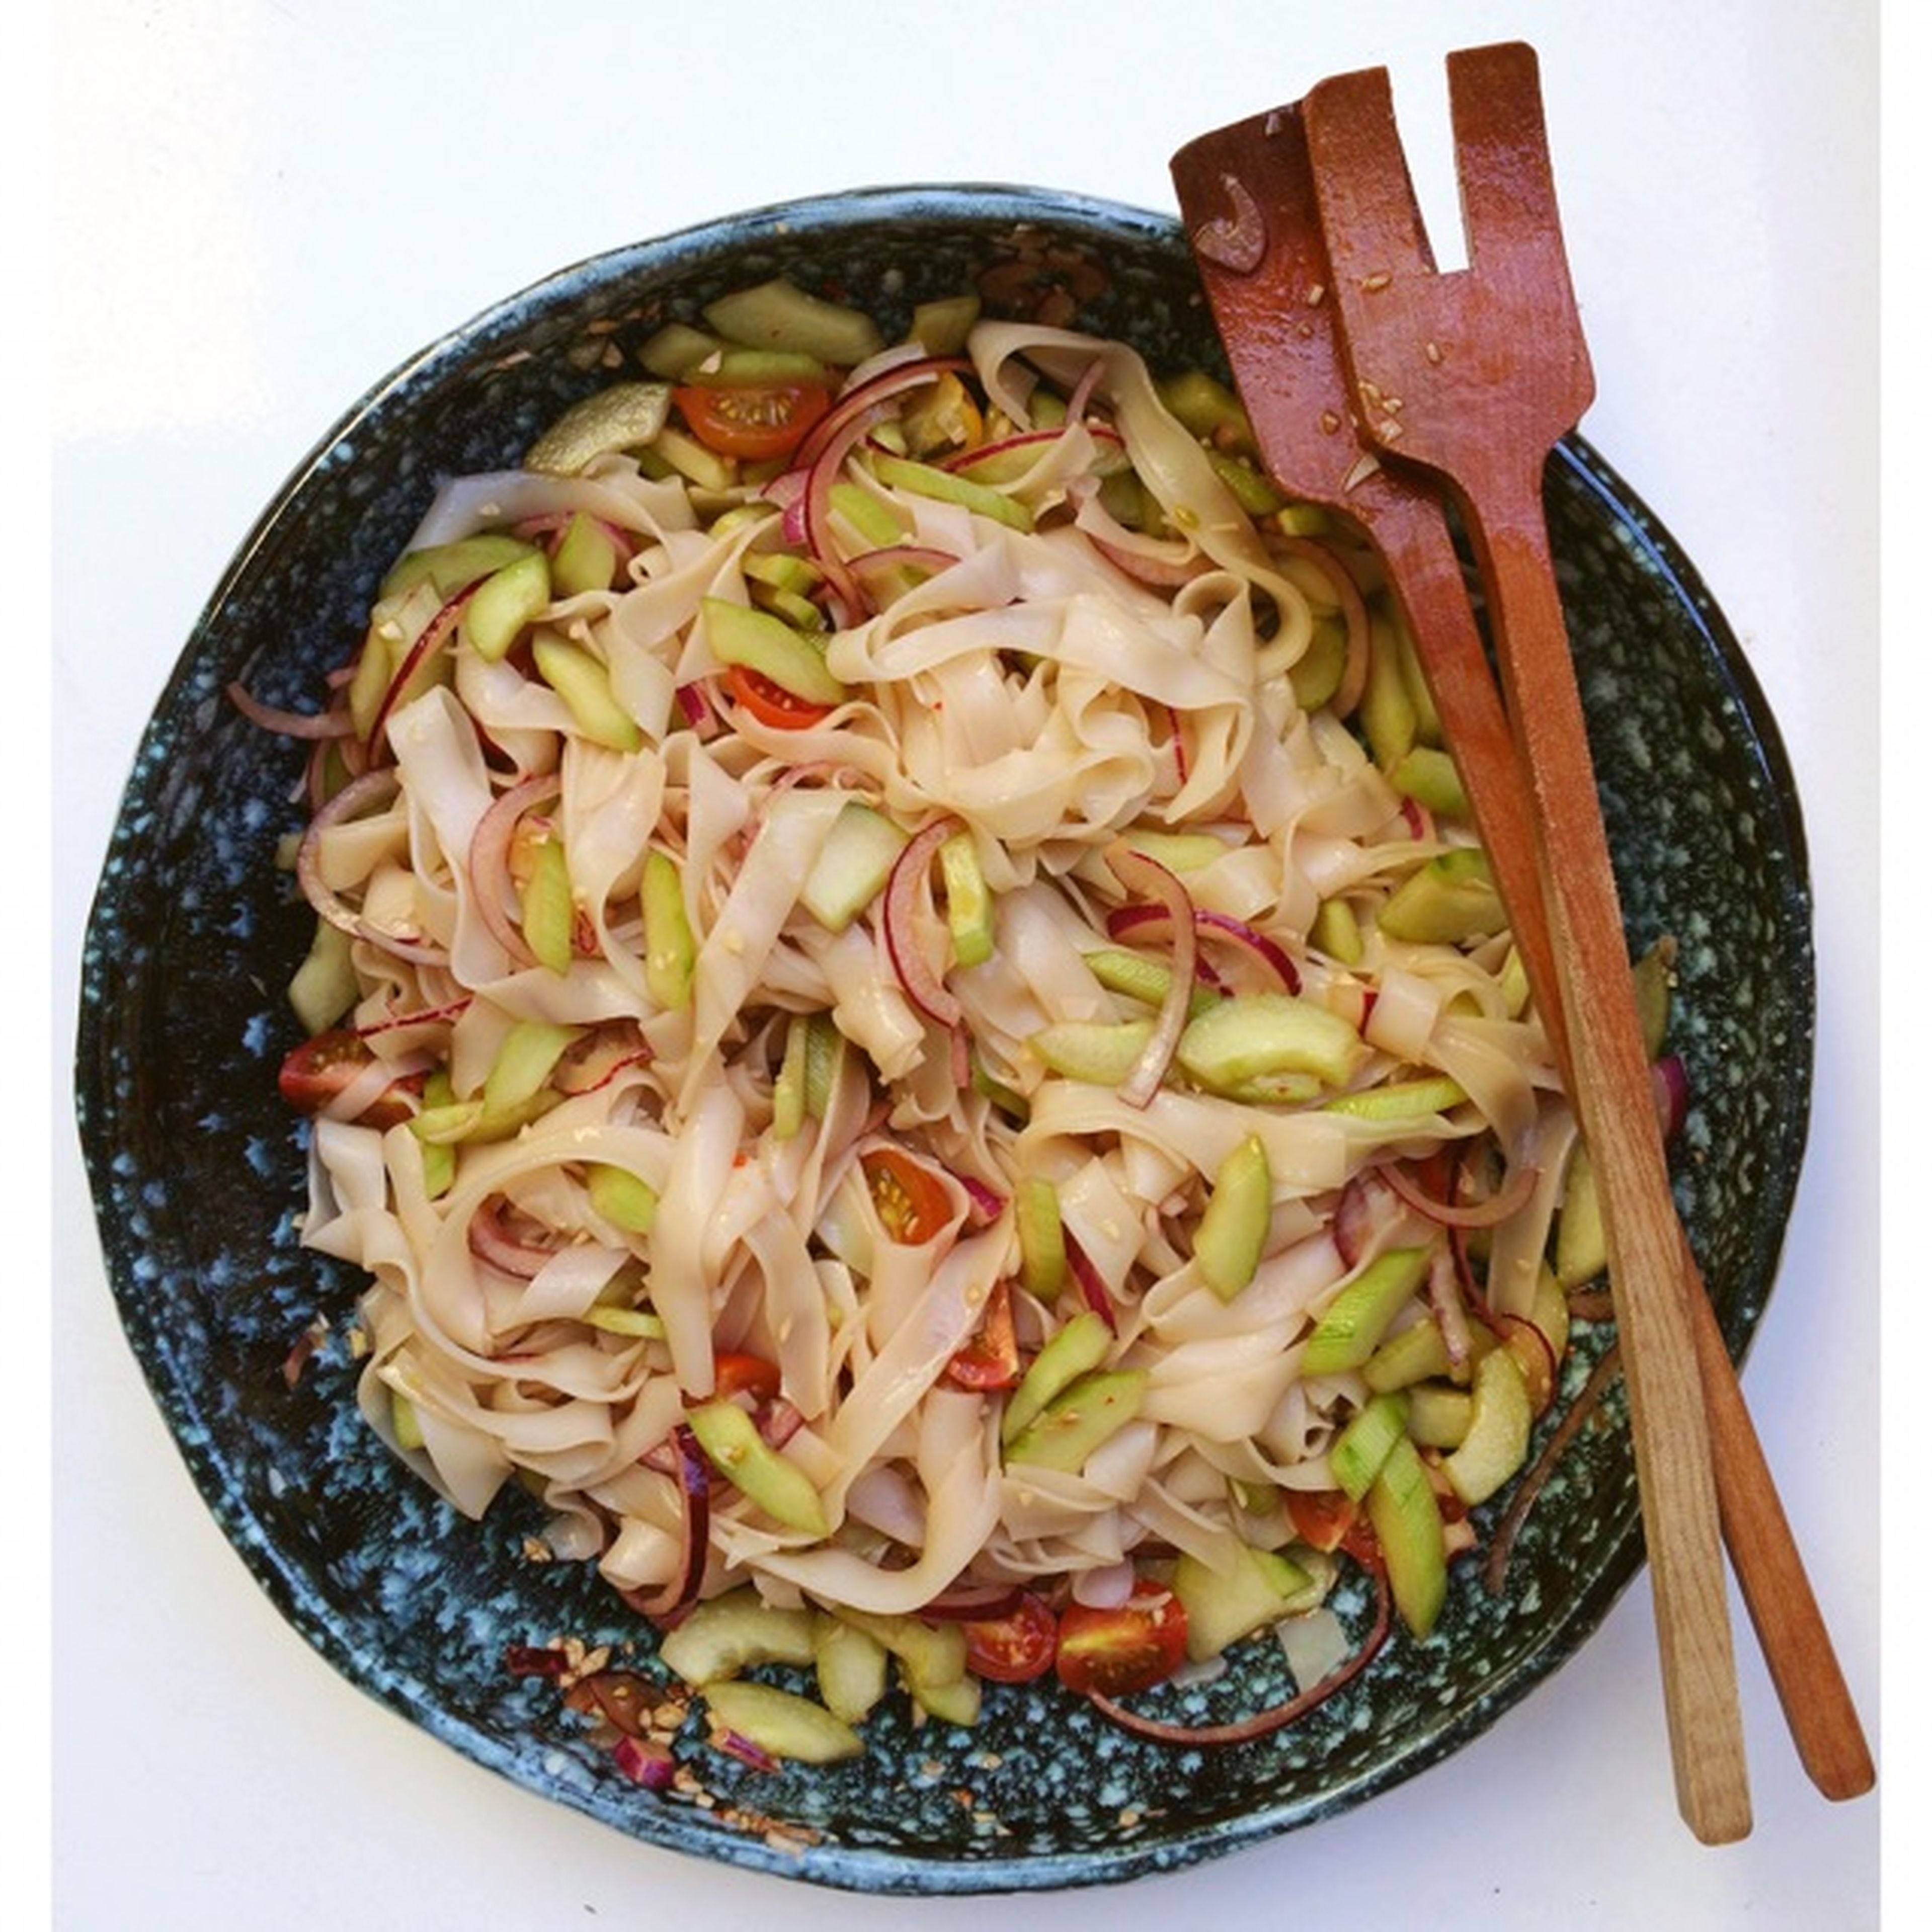 Chinese glass noodle salad